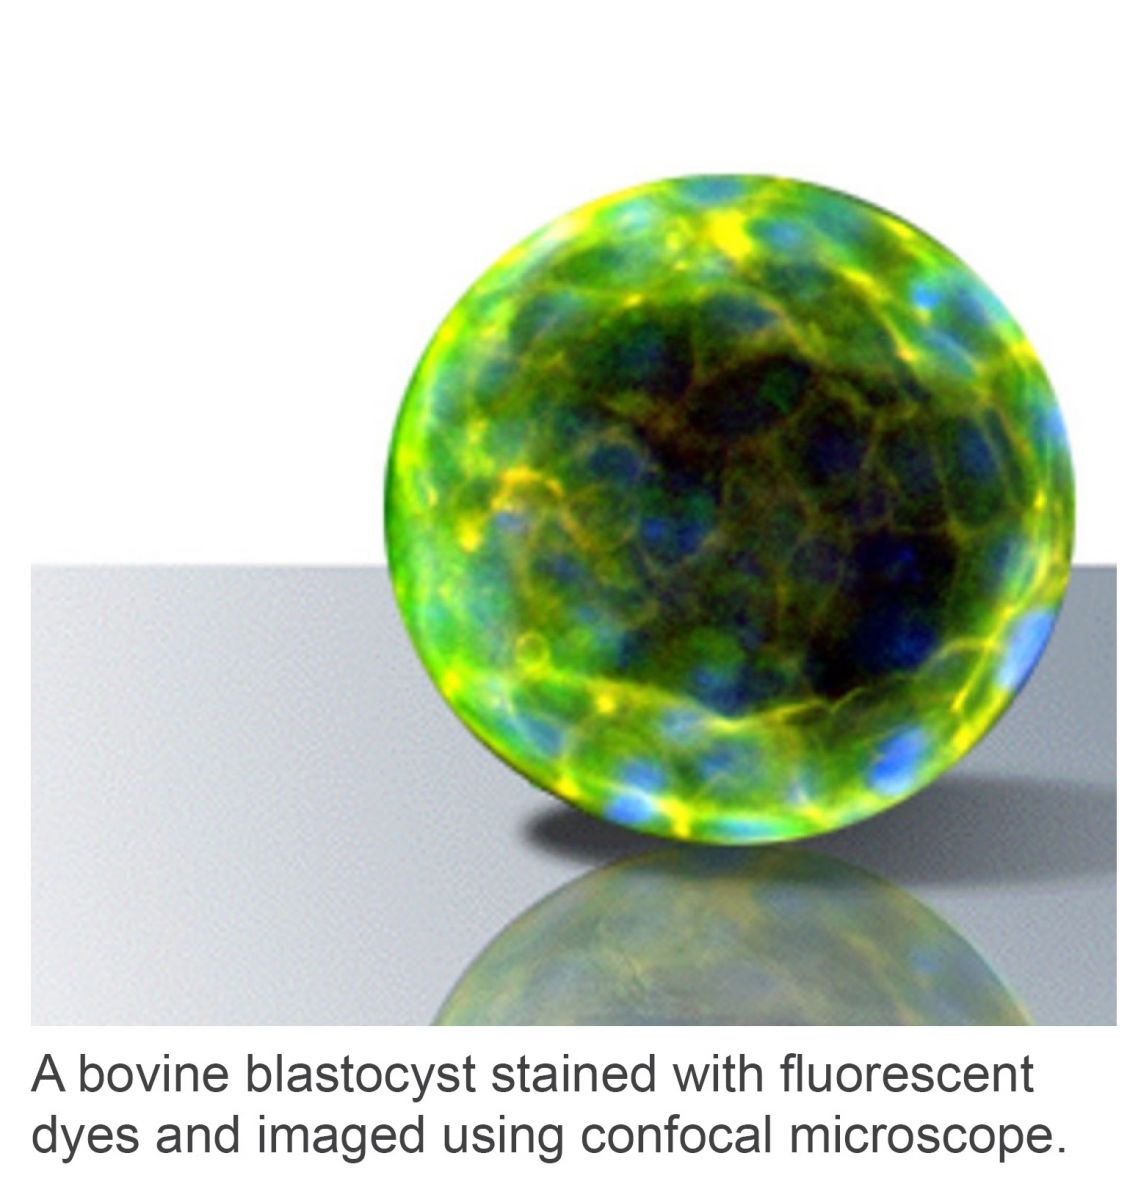 A bovine blastocyst stained with fluorescent dyes and imaged using confocal microscope.